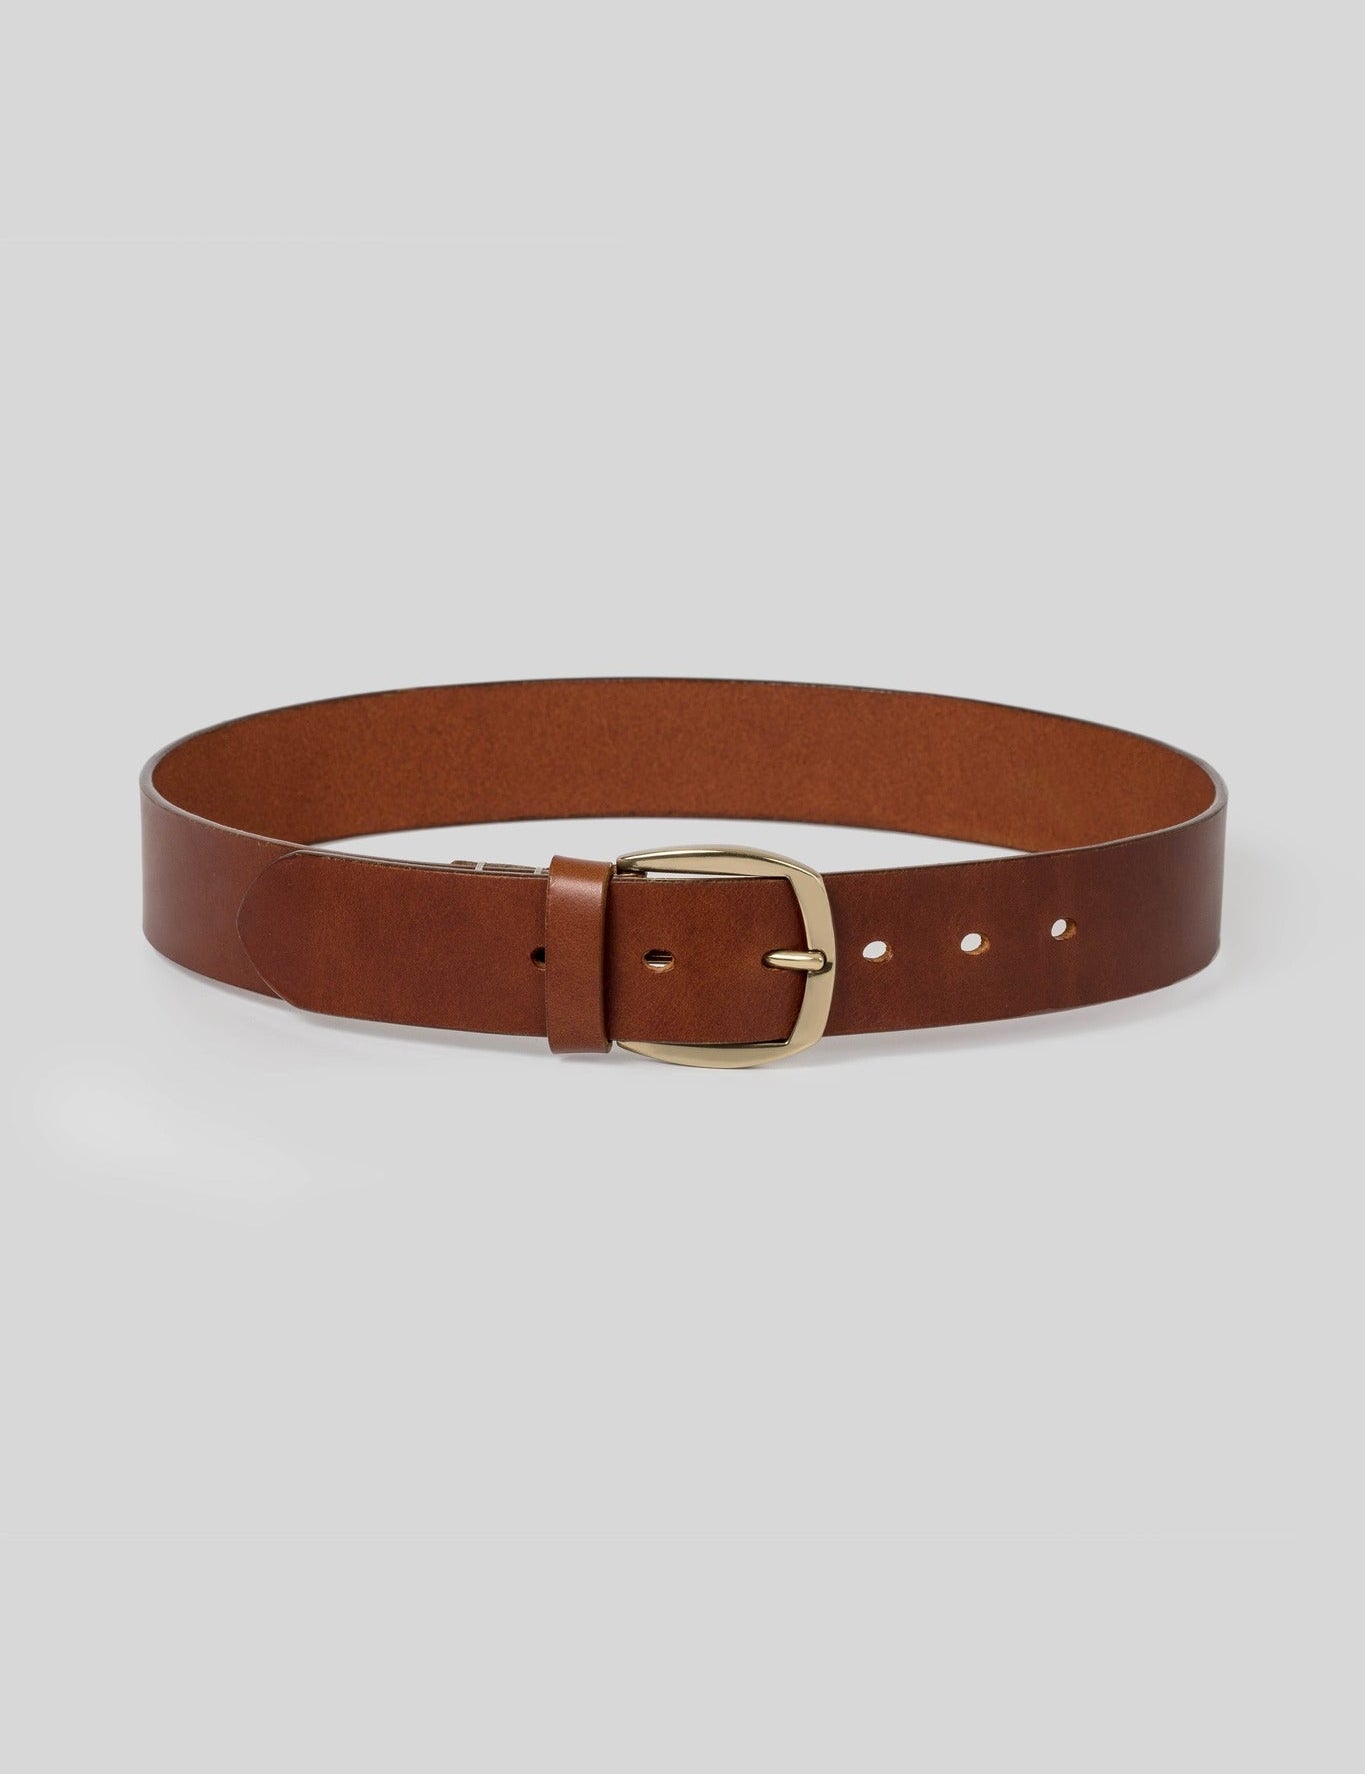 mens-luxury-basic-leather-belt-for-casual-style_93ca8c59-dd45-453d-a8aa-1d897133f44e.jpg